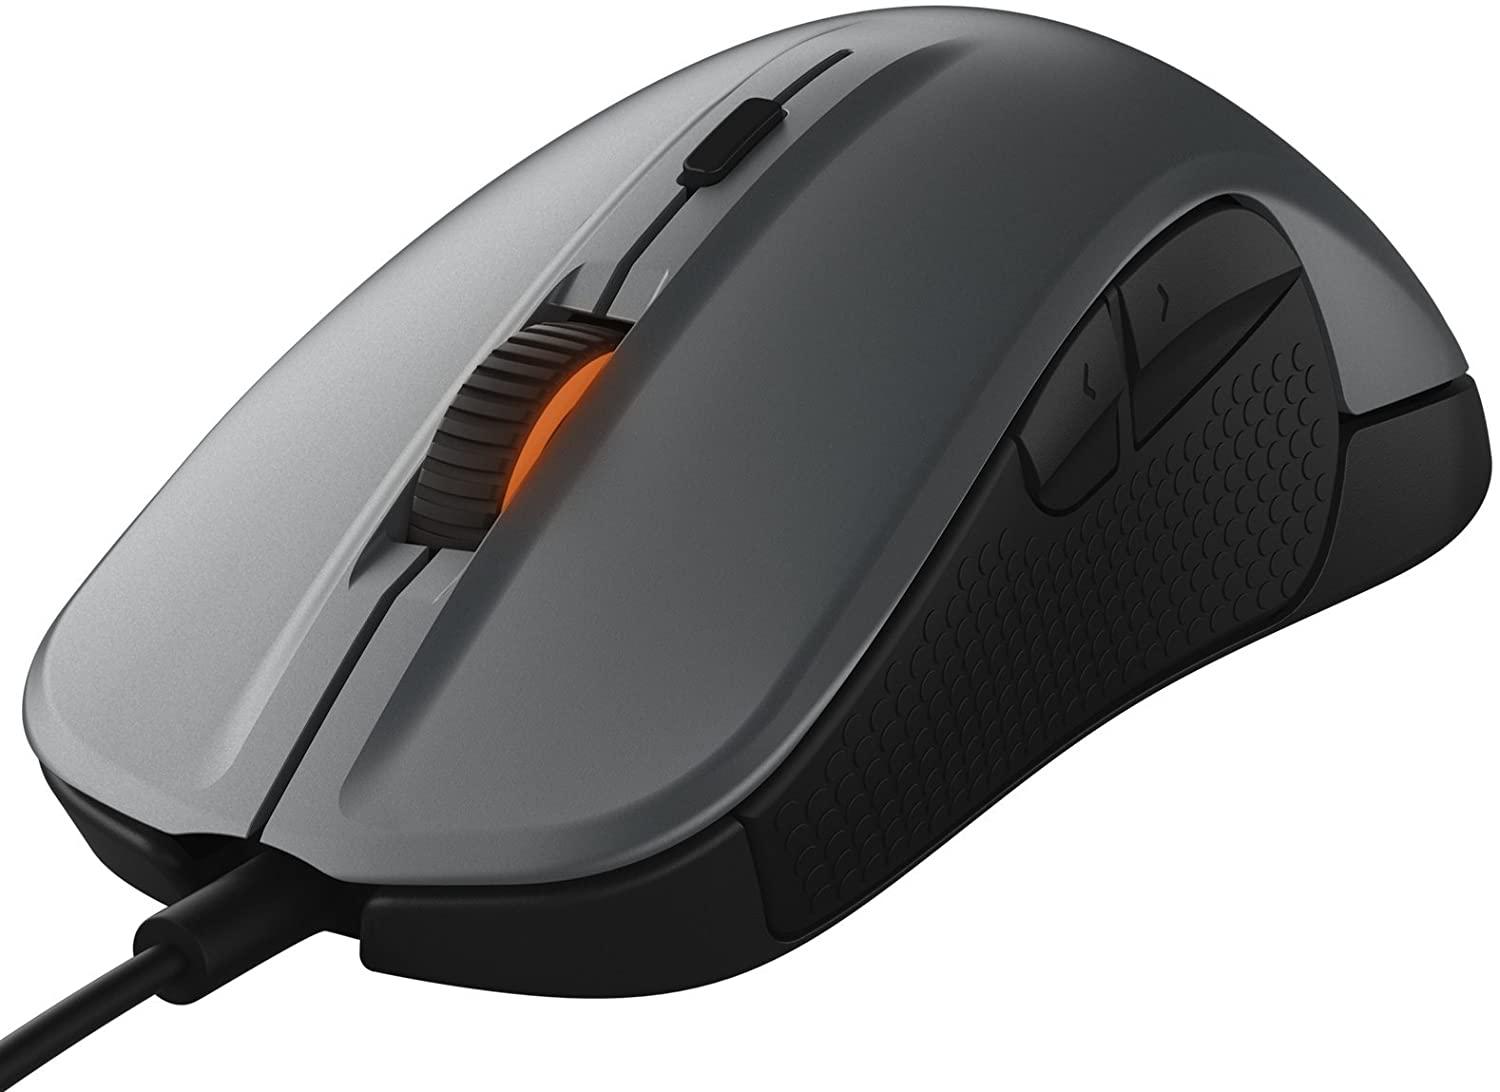 SteelSeries Rival 300, Optical Gaming Mouse